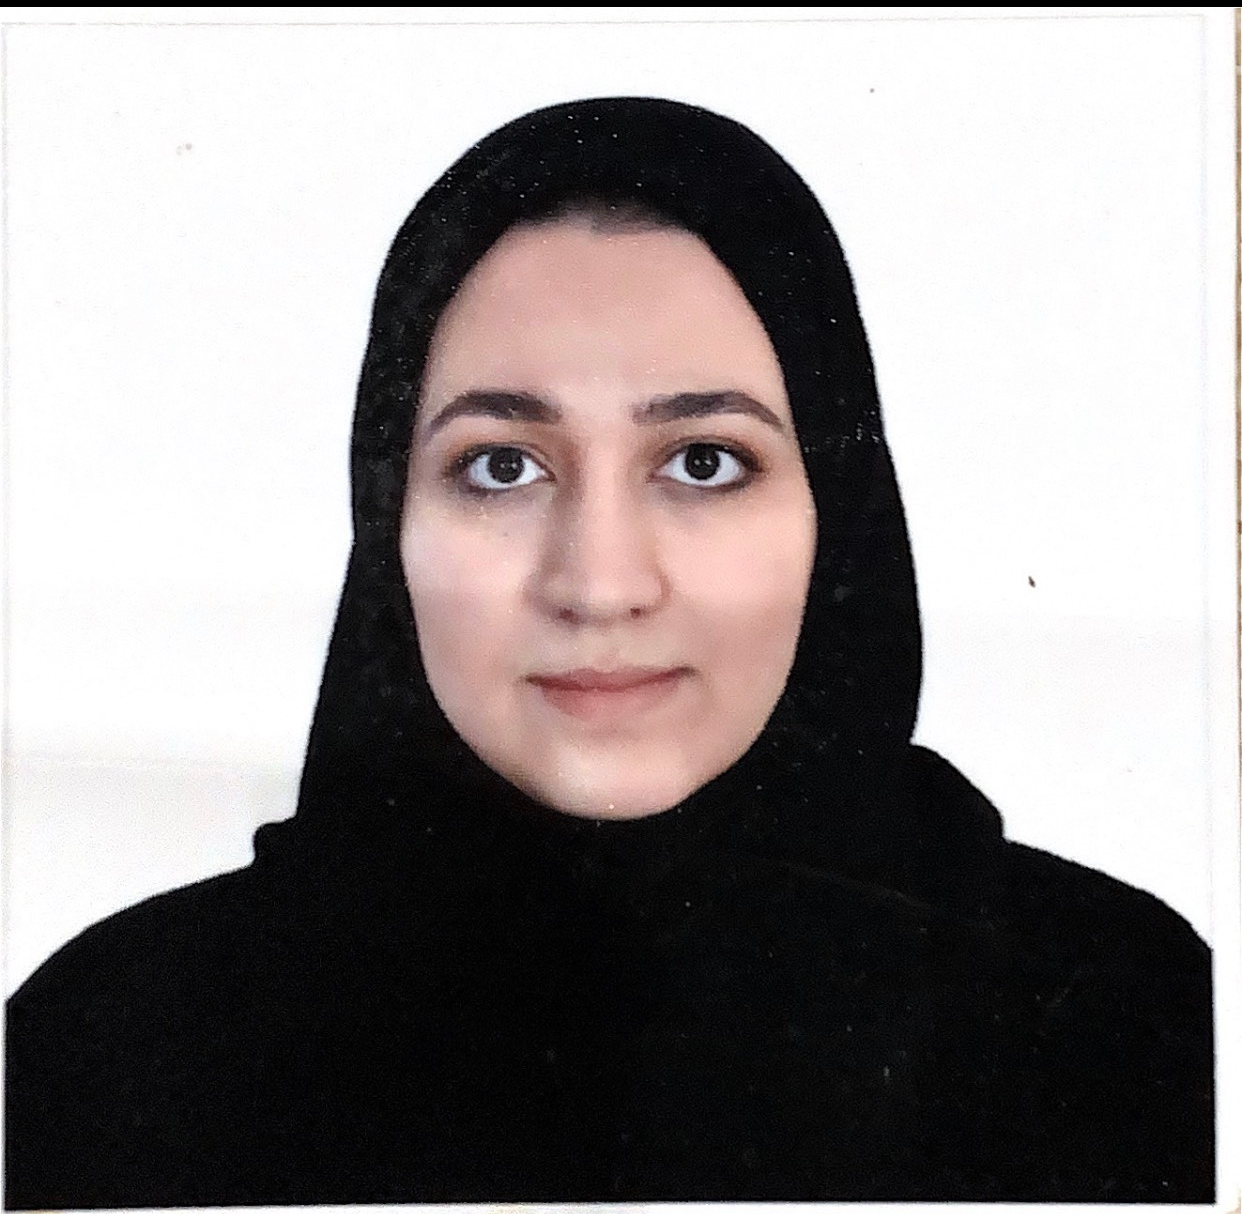 Ms. Hana A. Alahmari, Information Systems, College of Computer and Information Sciences (CCIS)